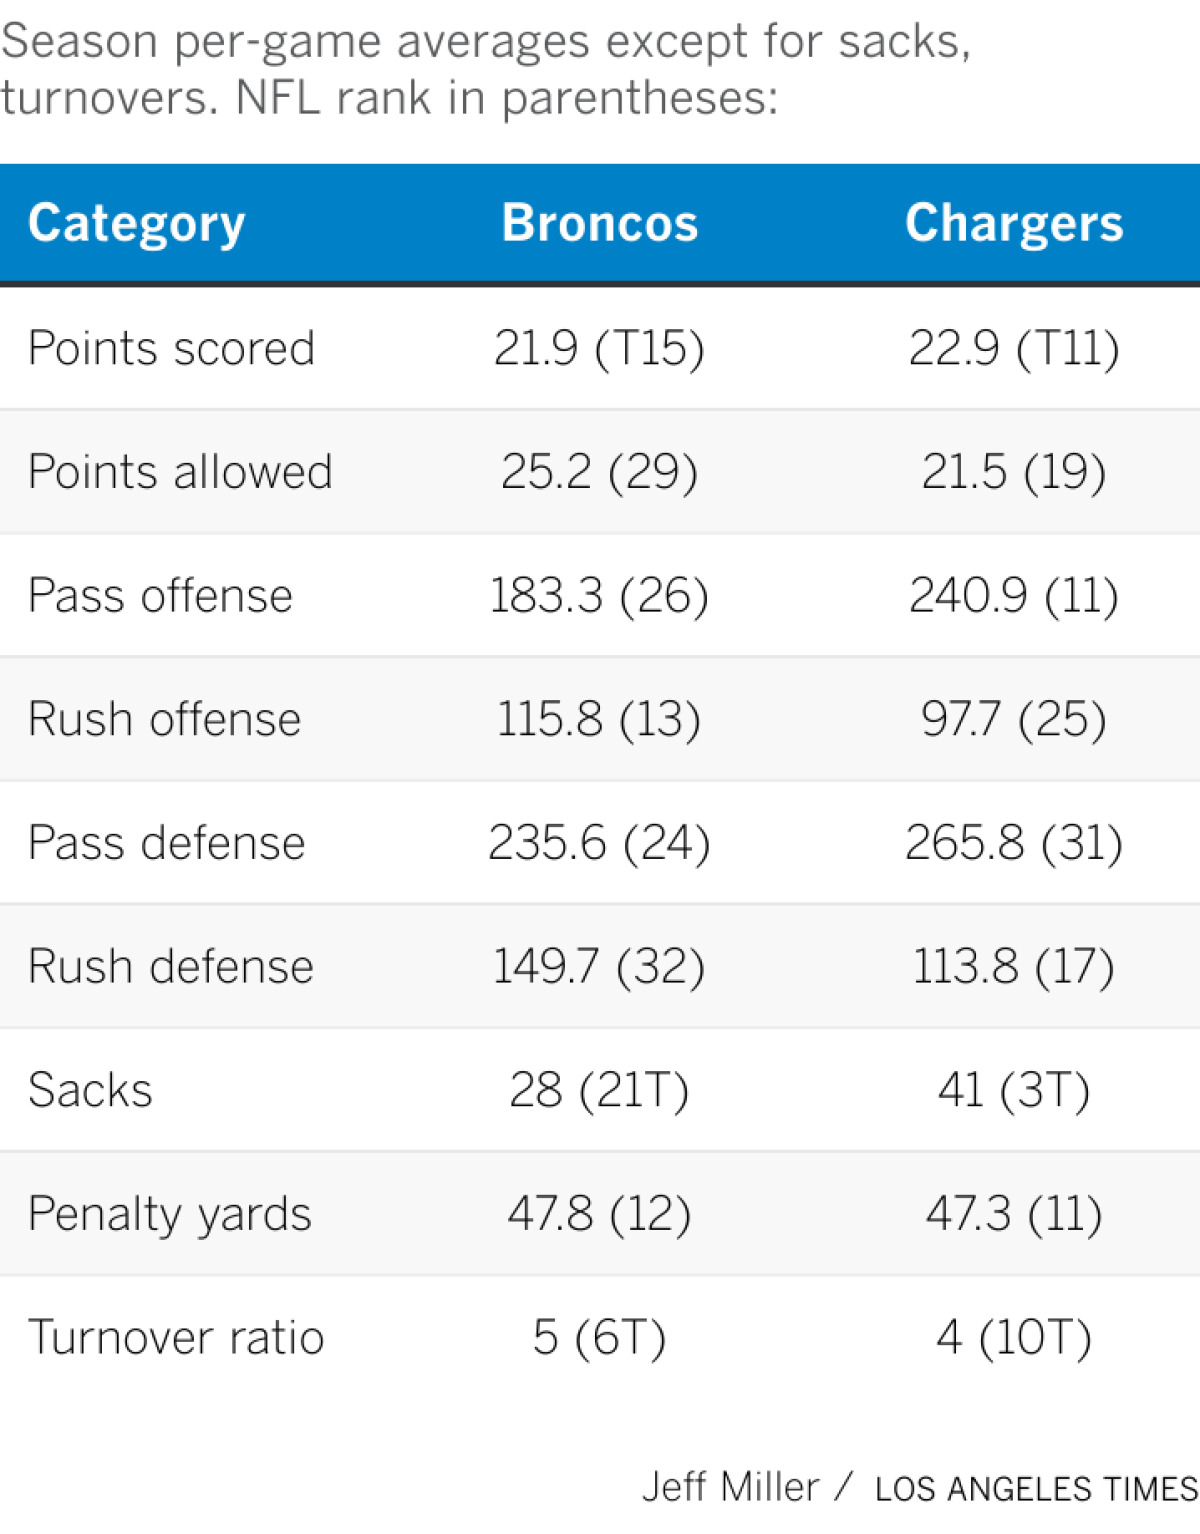 A chart comparing season stats for the Chargers and Broncos season stats.